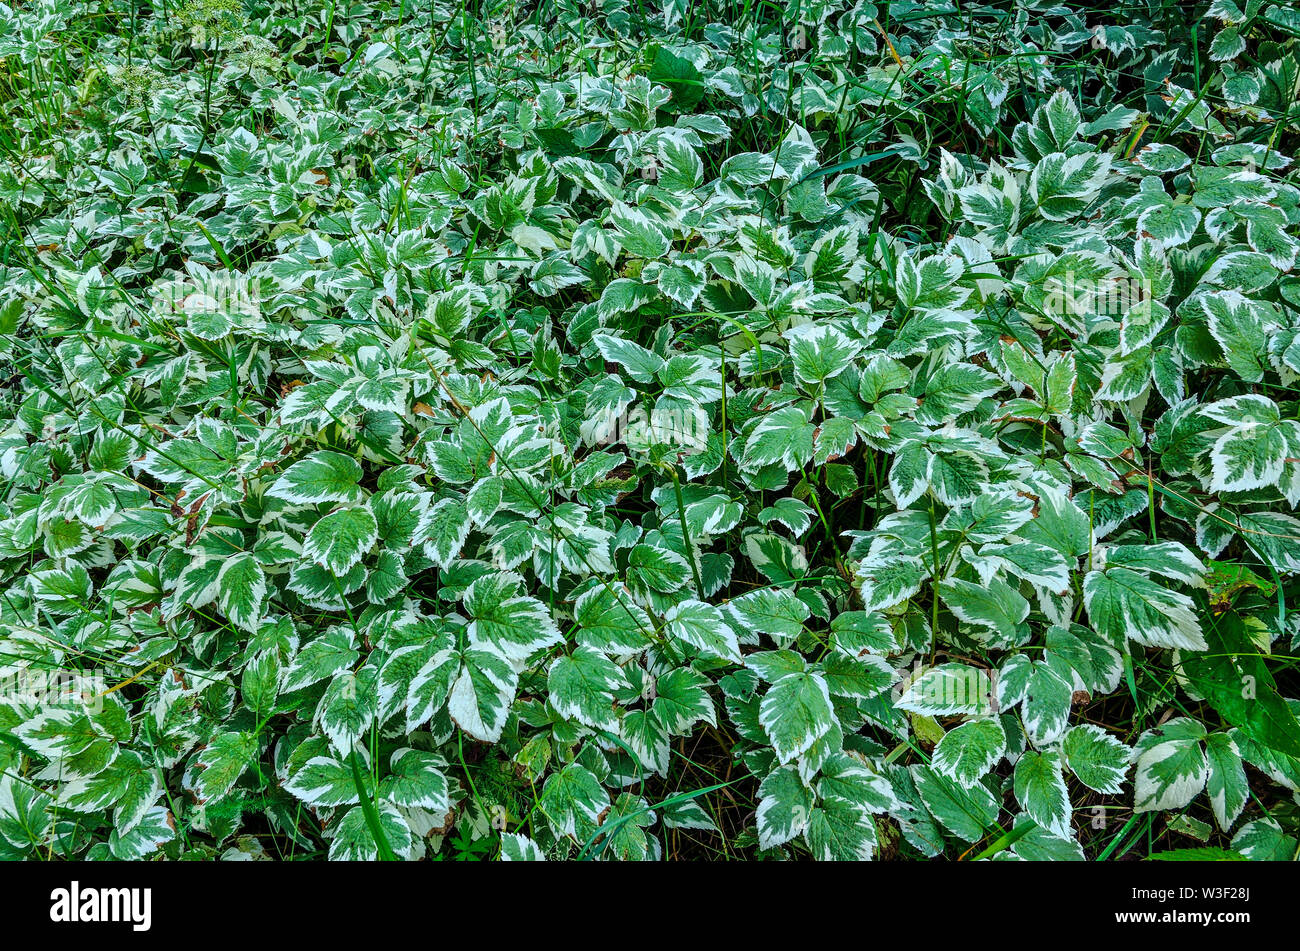 Decorative varieagated leaves of Aegopodium podagraria (ground elder, herb gerard, bishop's weed, goutweed, gout wort, snow-in-the-mountain, English m Stock Photo